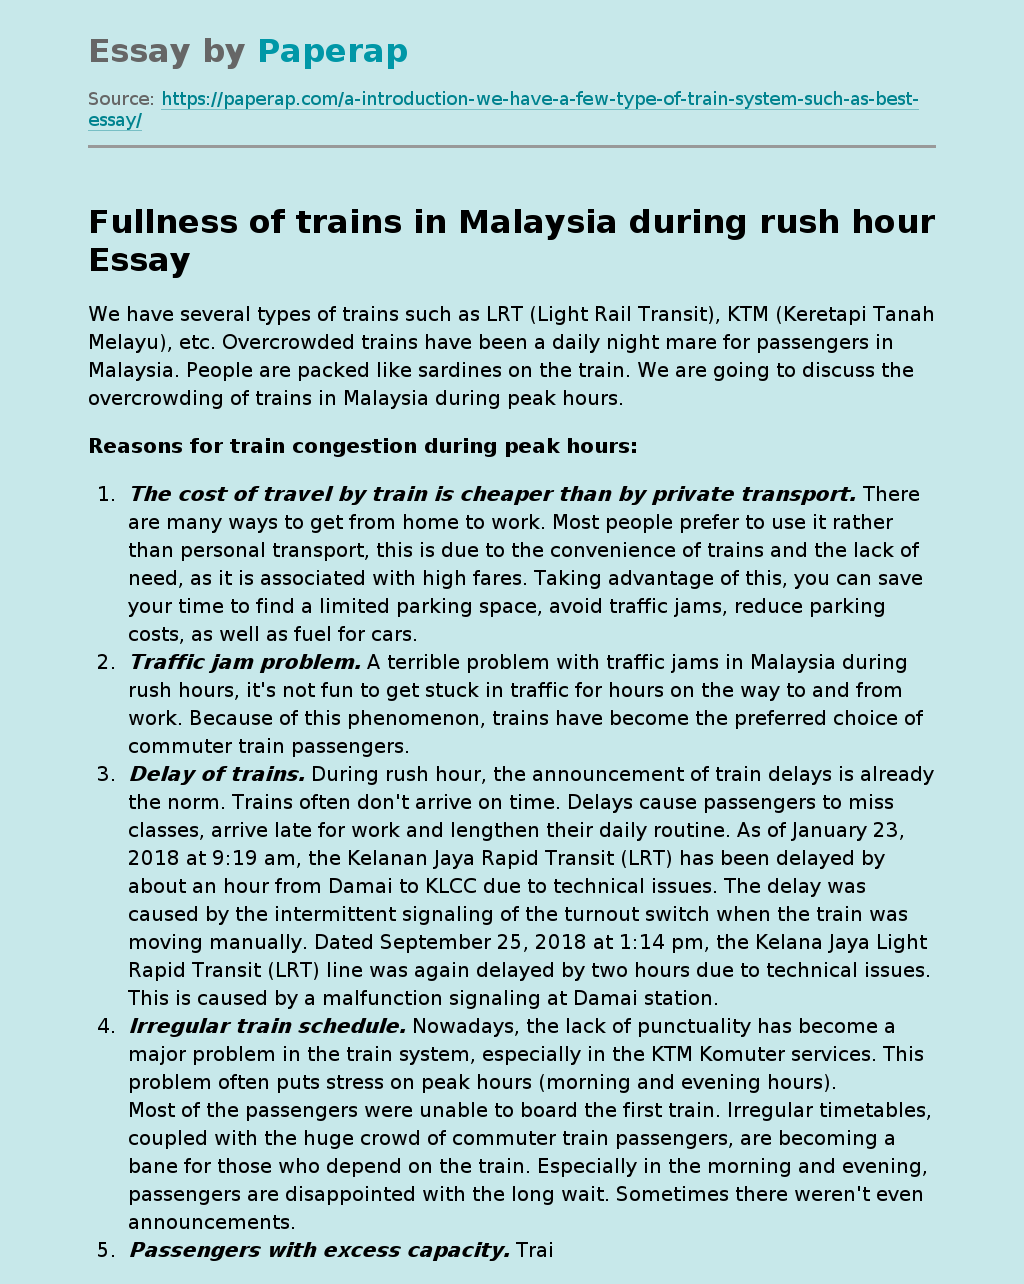 Fullness of trains in Malaysia during rush hour